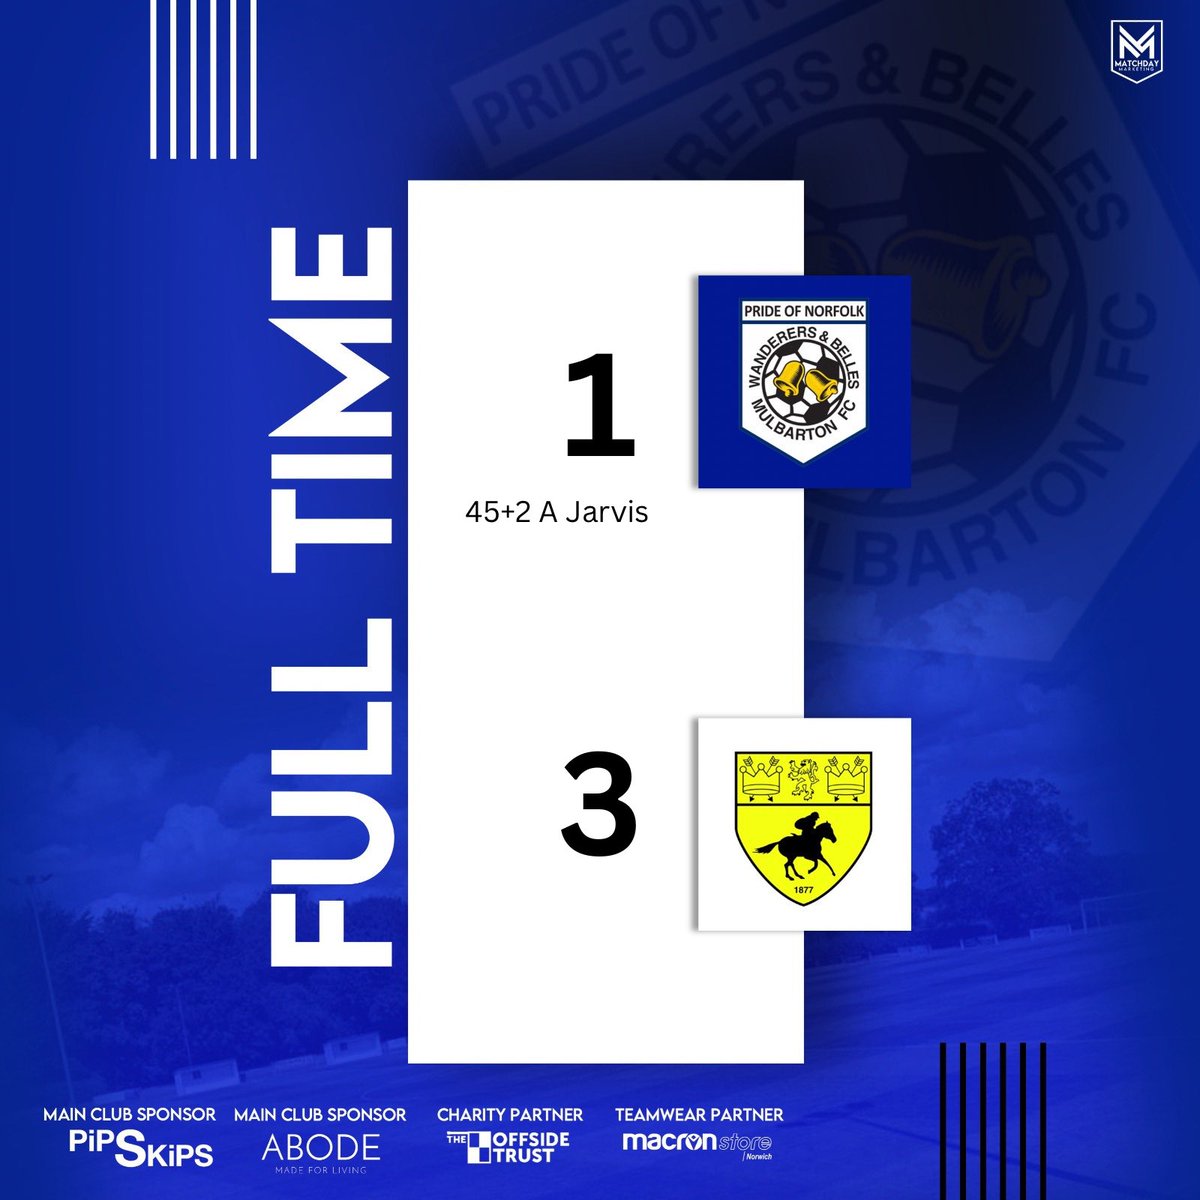 Final whistle blows. Damage done in a frantic 6 first half minutes. The lads battled throughout and created several opportunities but not to be today. Our final game of the season has us travel to @SohamTownRanger next Saturday.